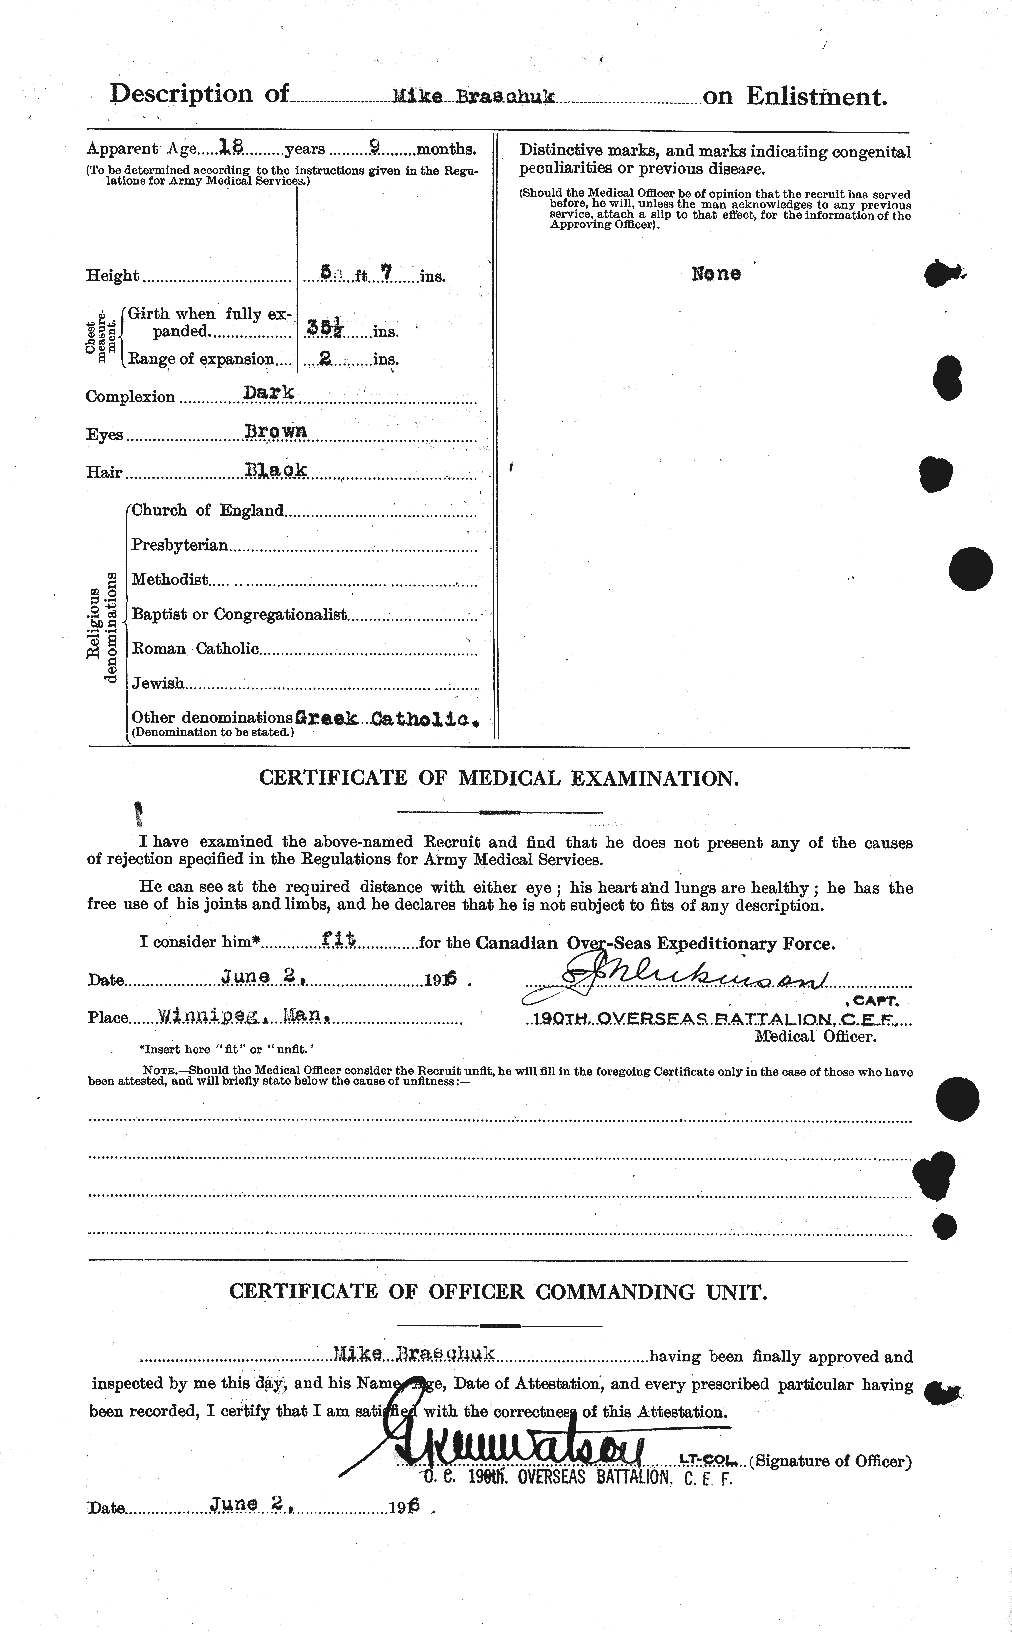 Personnel Records of the First World War - CEF 260415b